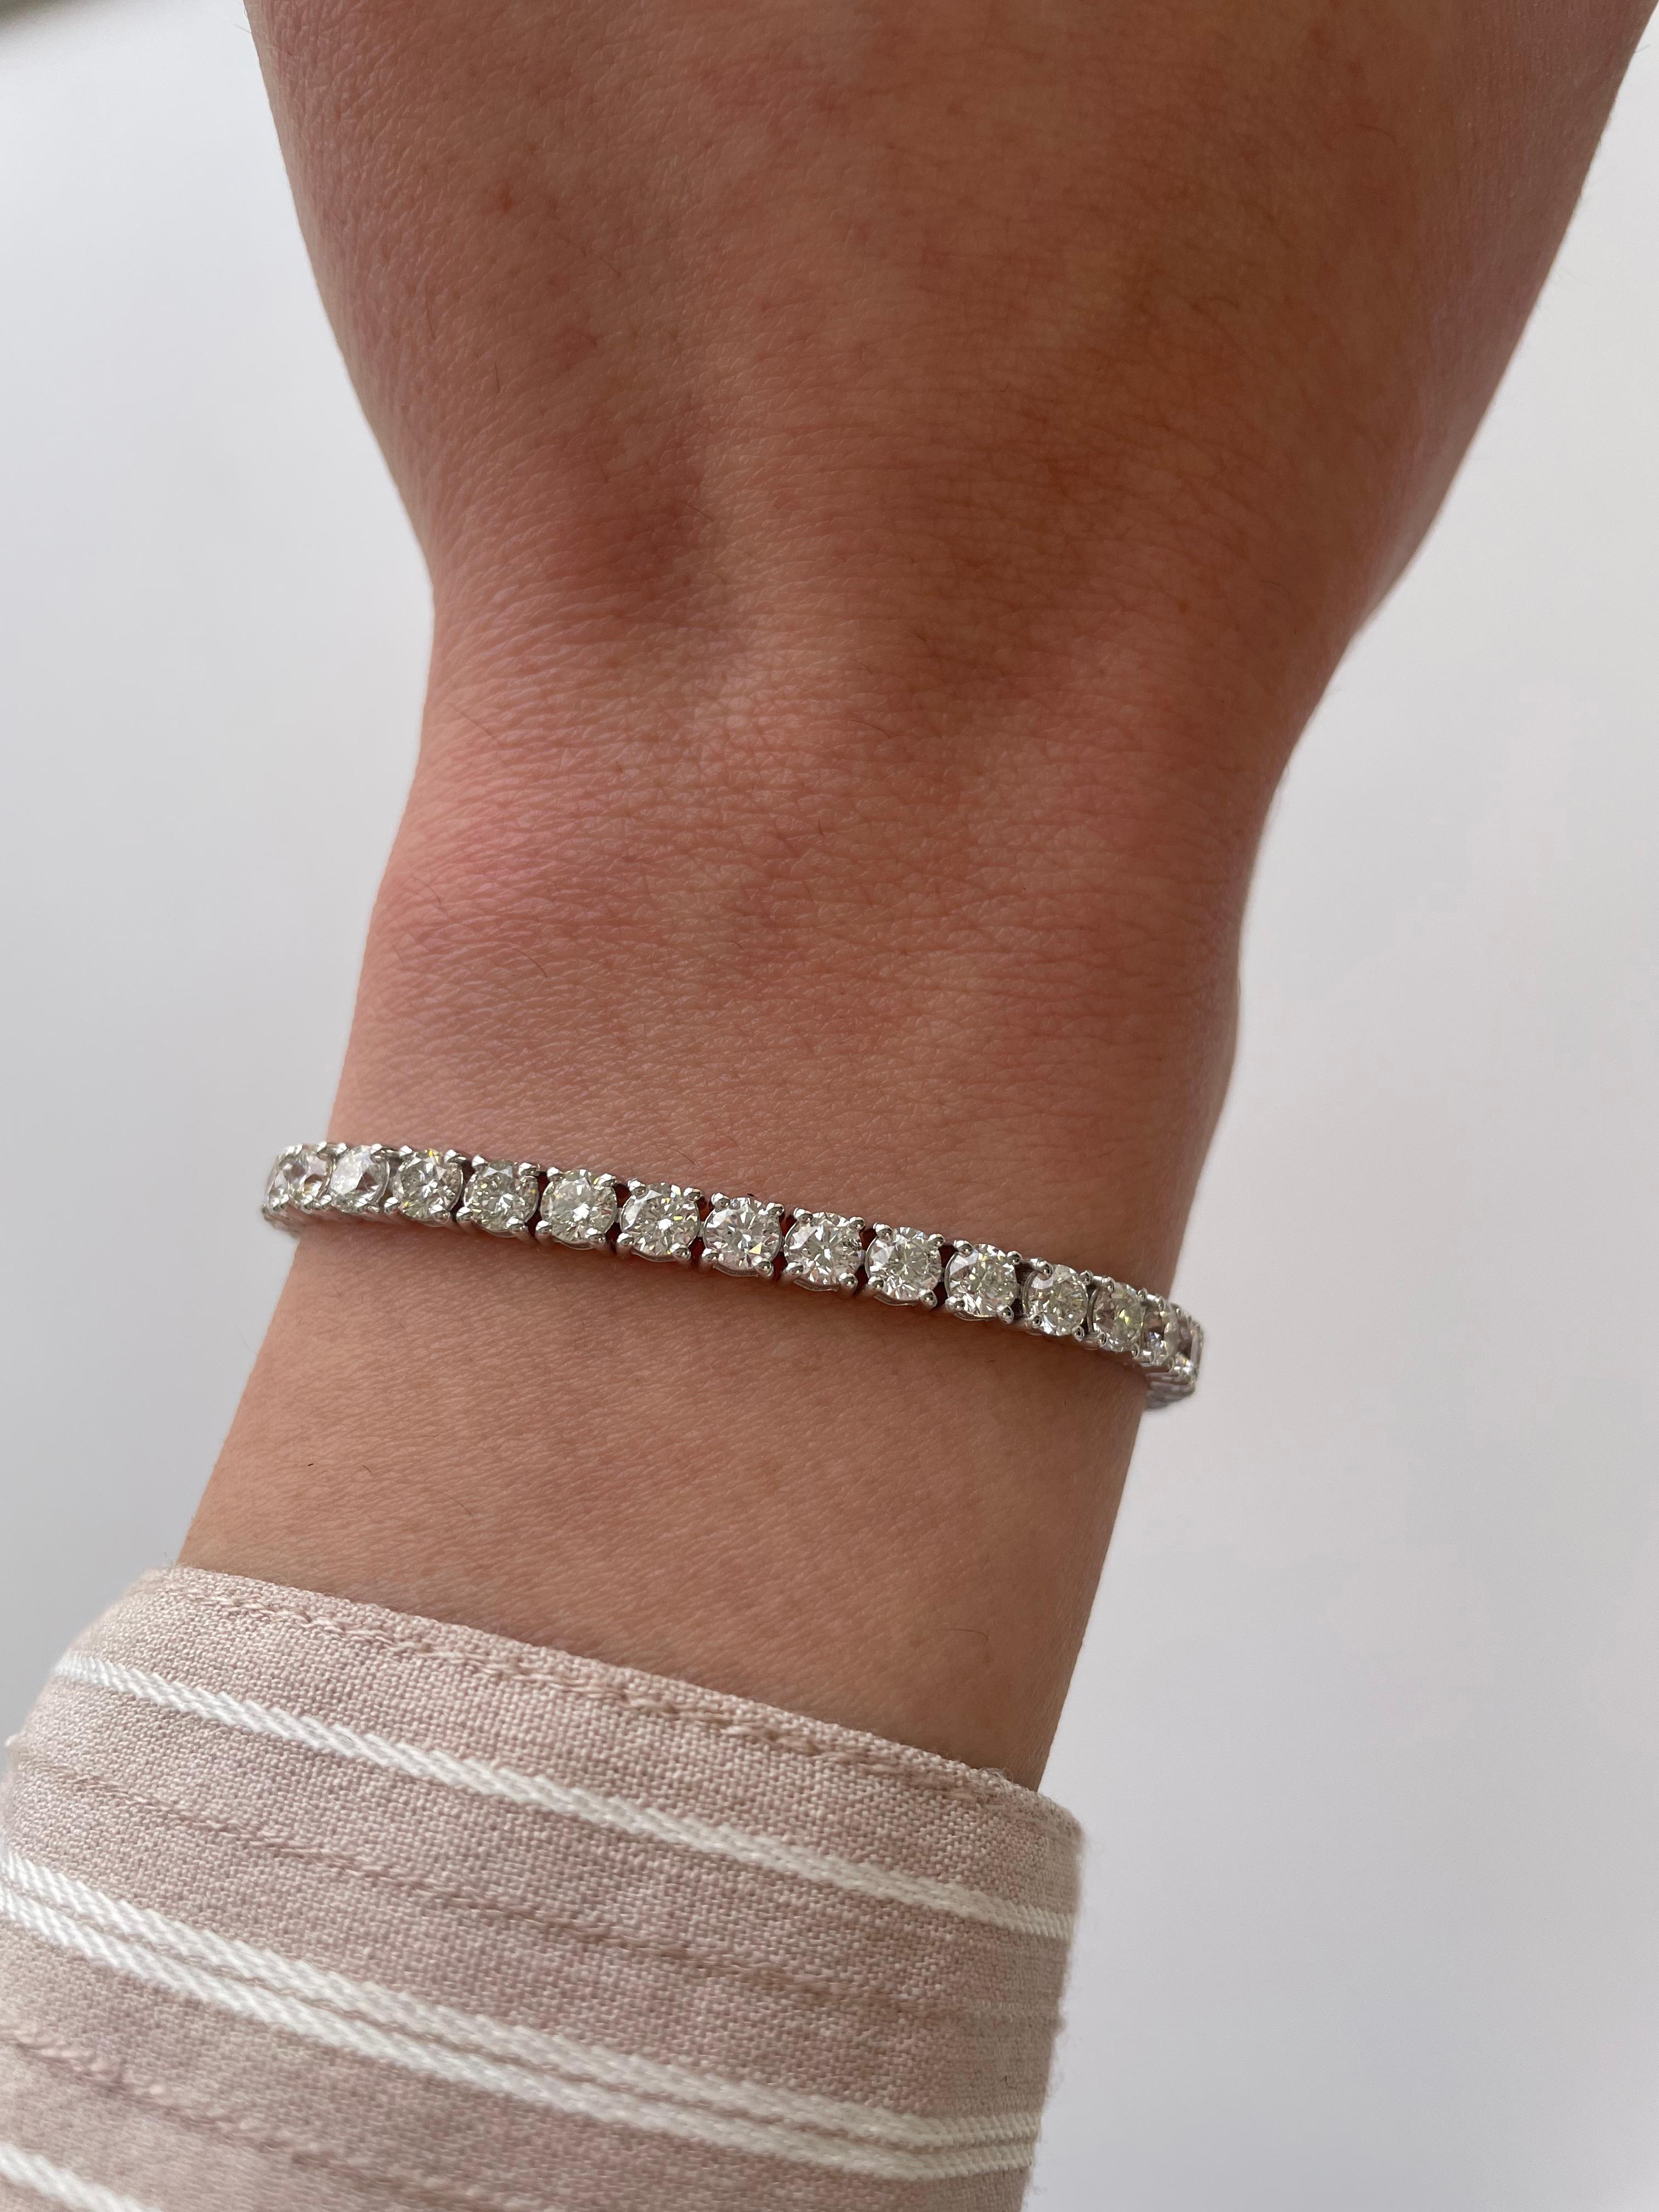 Exquisite and timeless diamonds tennis bracelet, by Alexander Beverly Hills.
45 round brilliant diamonds, 8.33 carats. Approximately D-F color and SI clarity. Four prong set in 18k white gold, 10.82 grams, 7 inches. 
Accommodated with an up-to-date